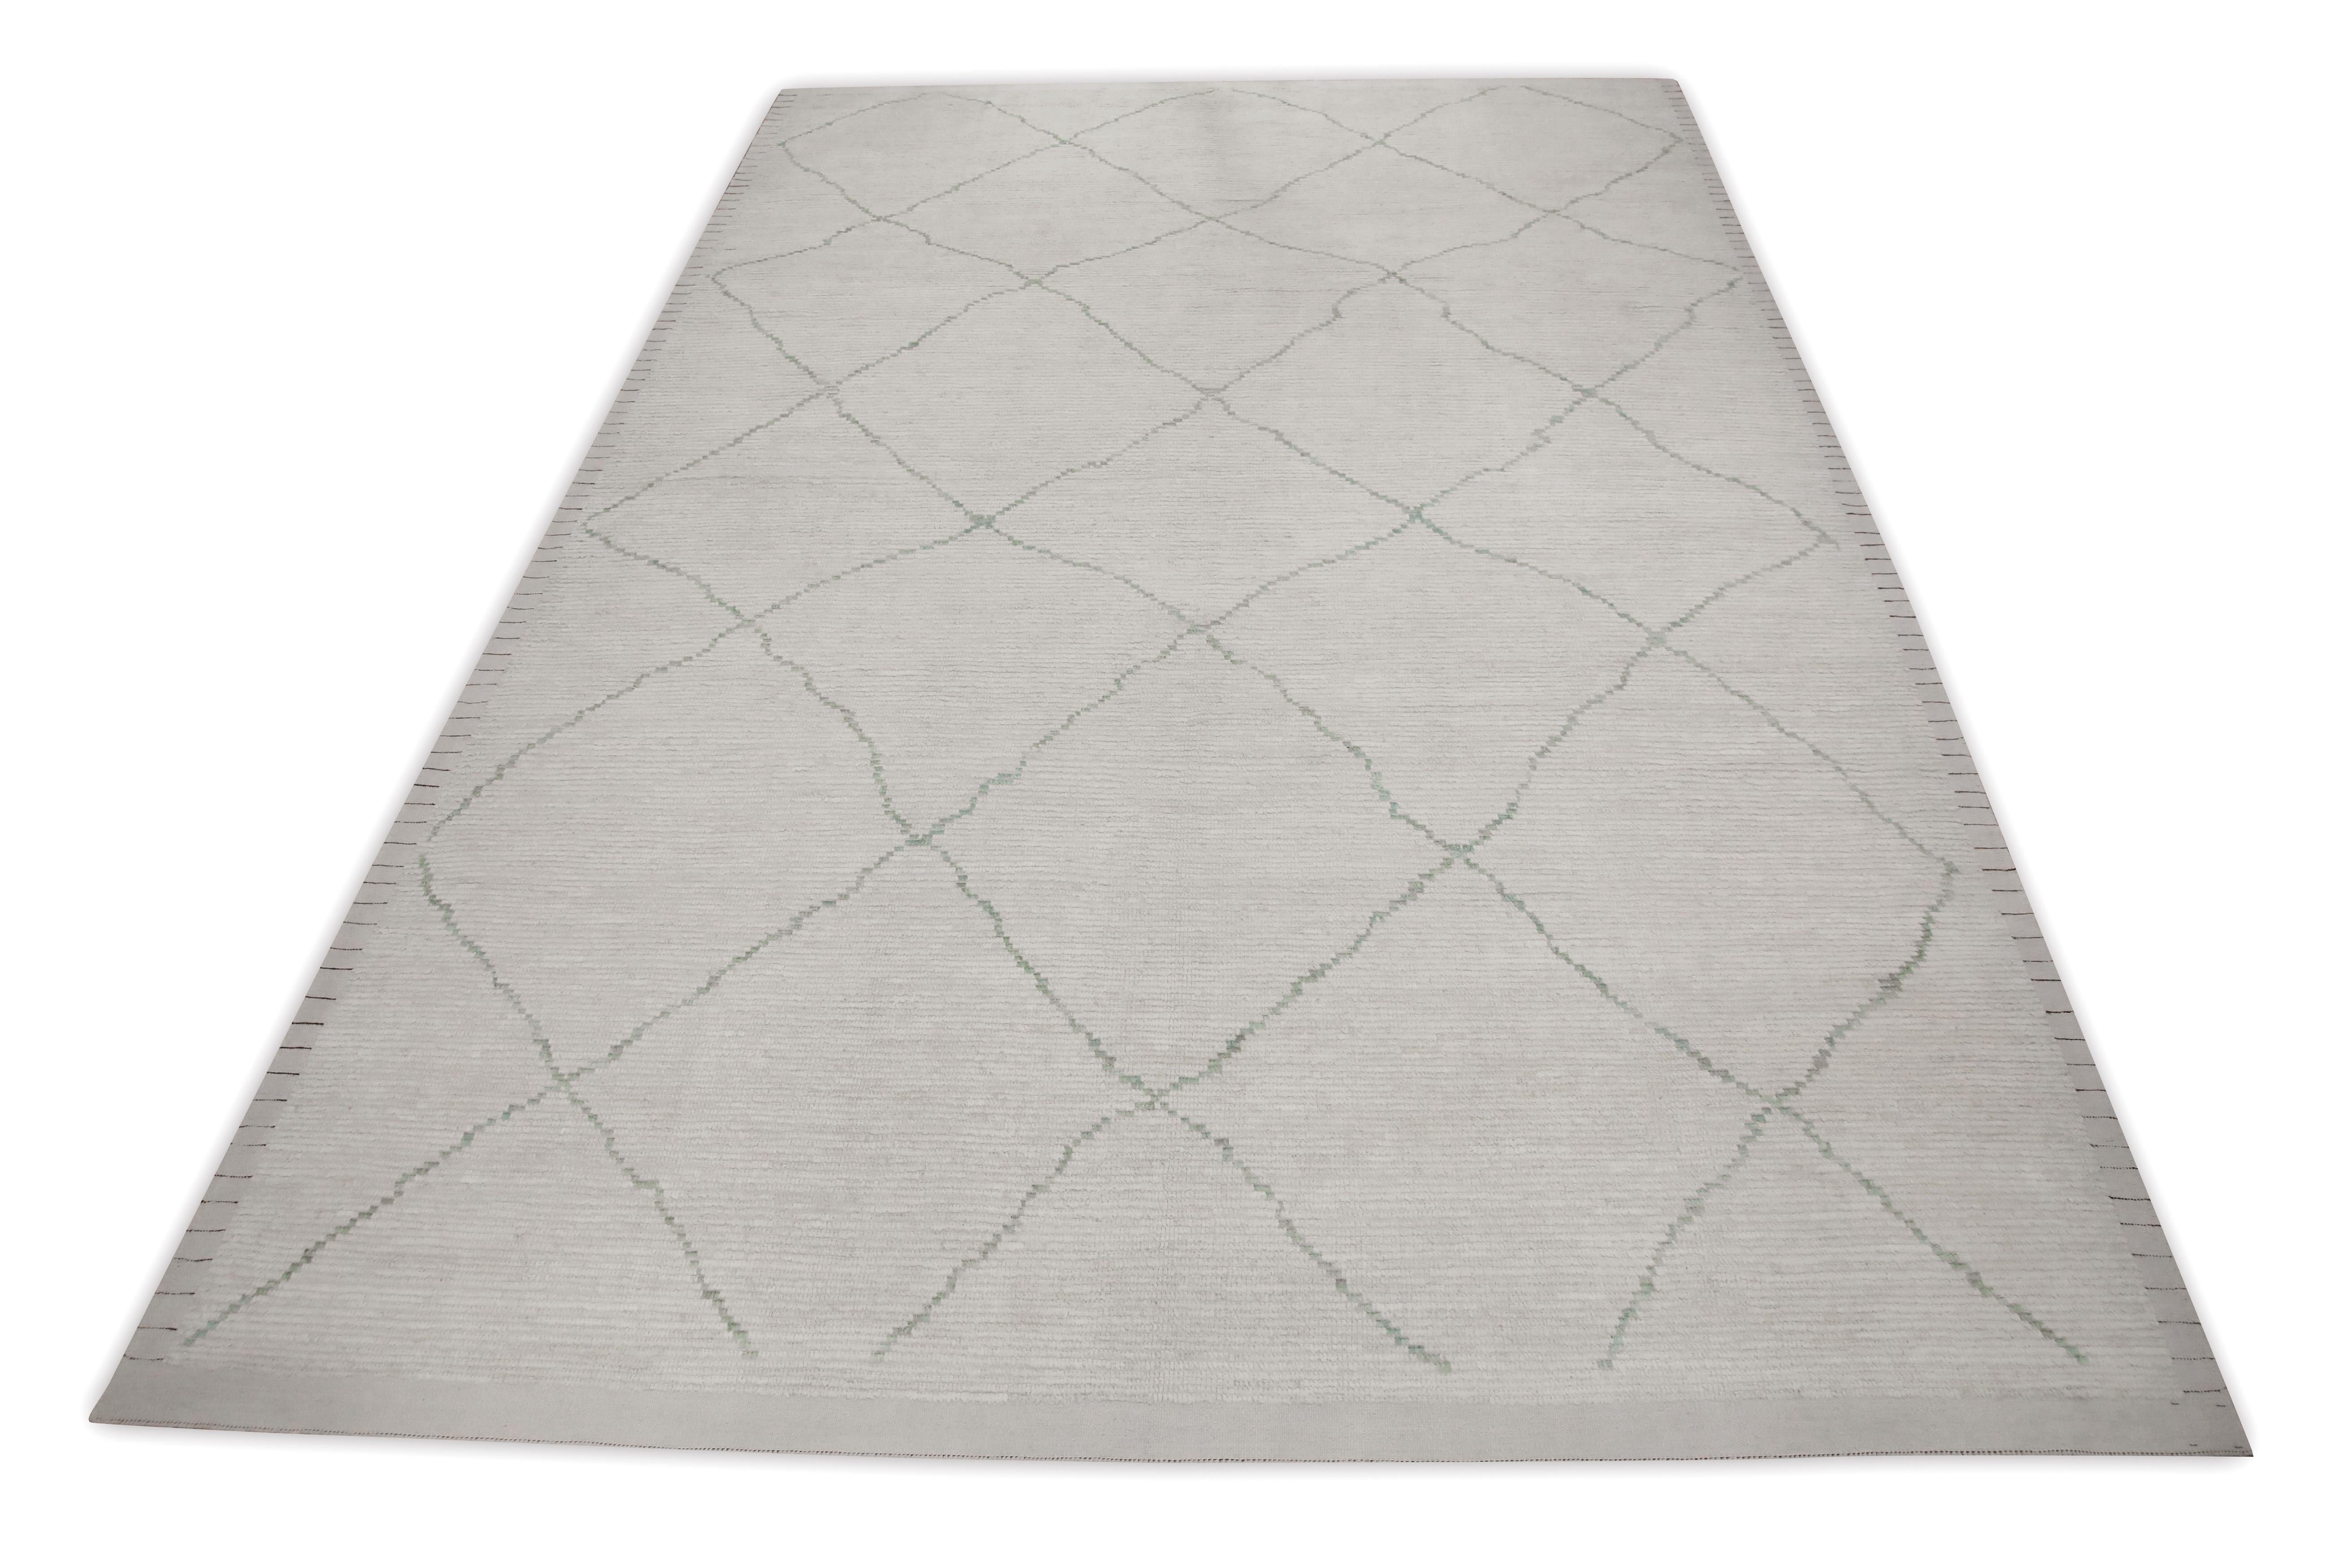 Contemporary White 21st Century Modern Moroccan Style Wool Rug 9'9